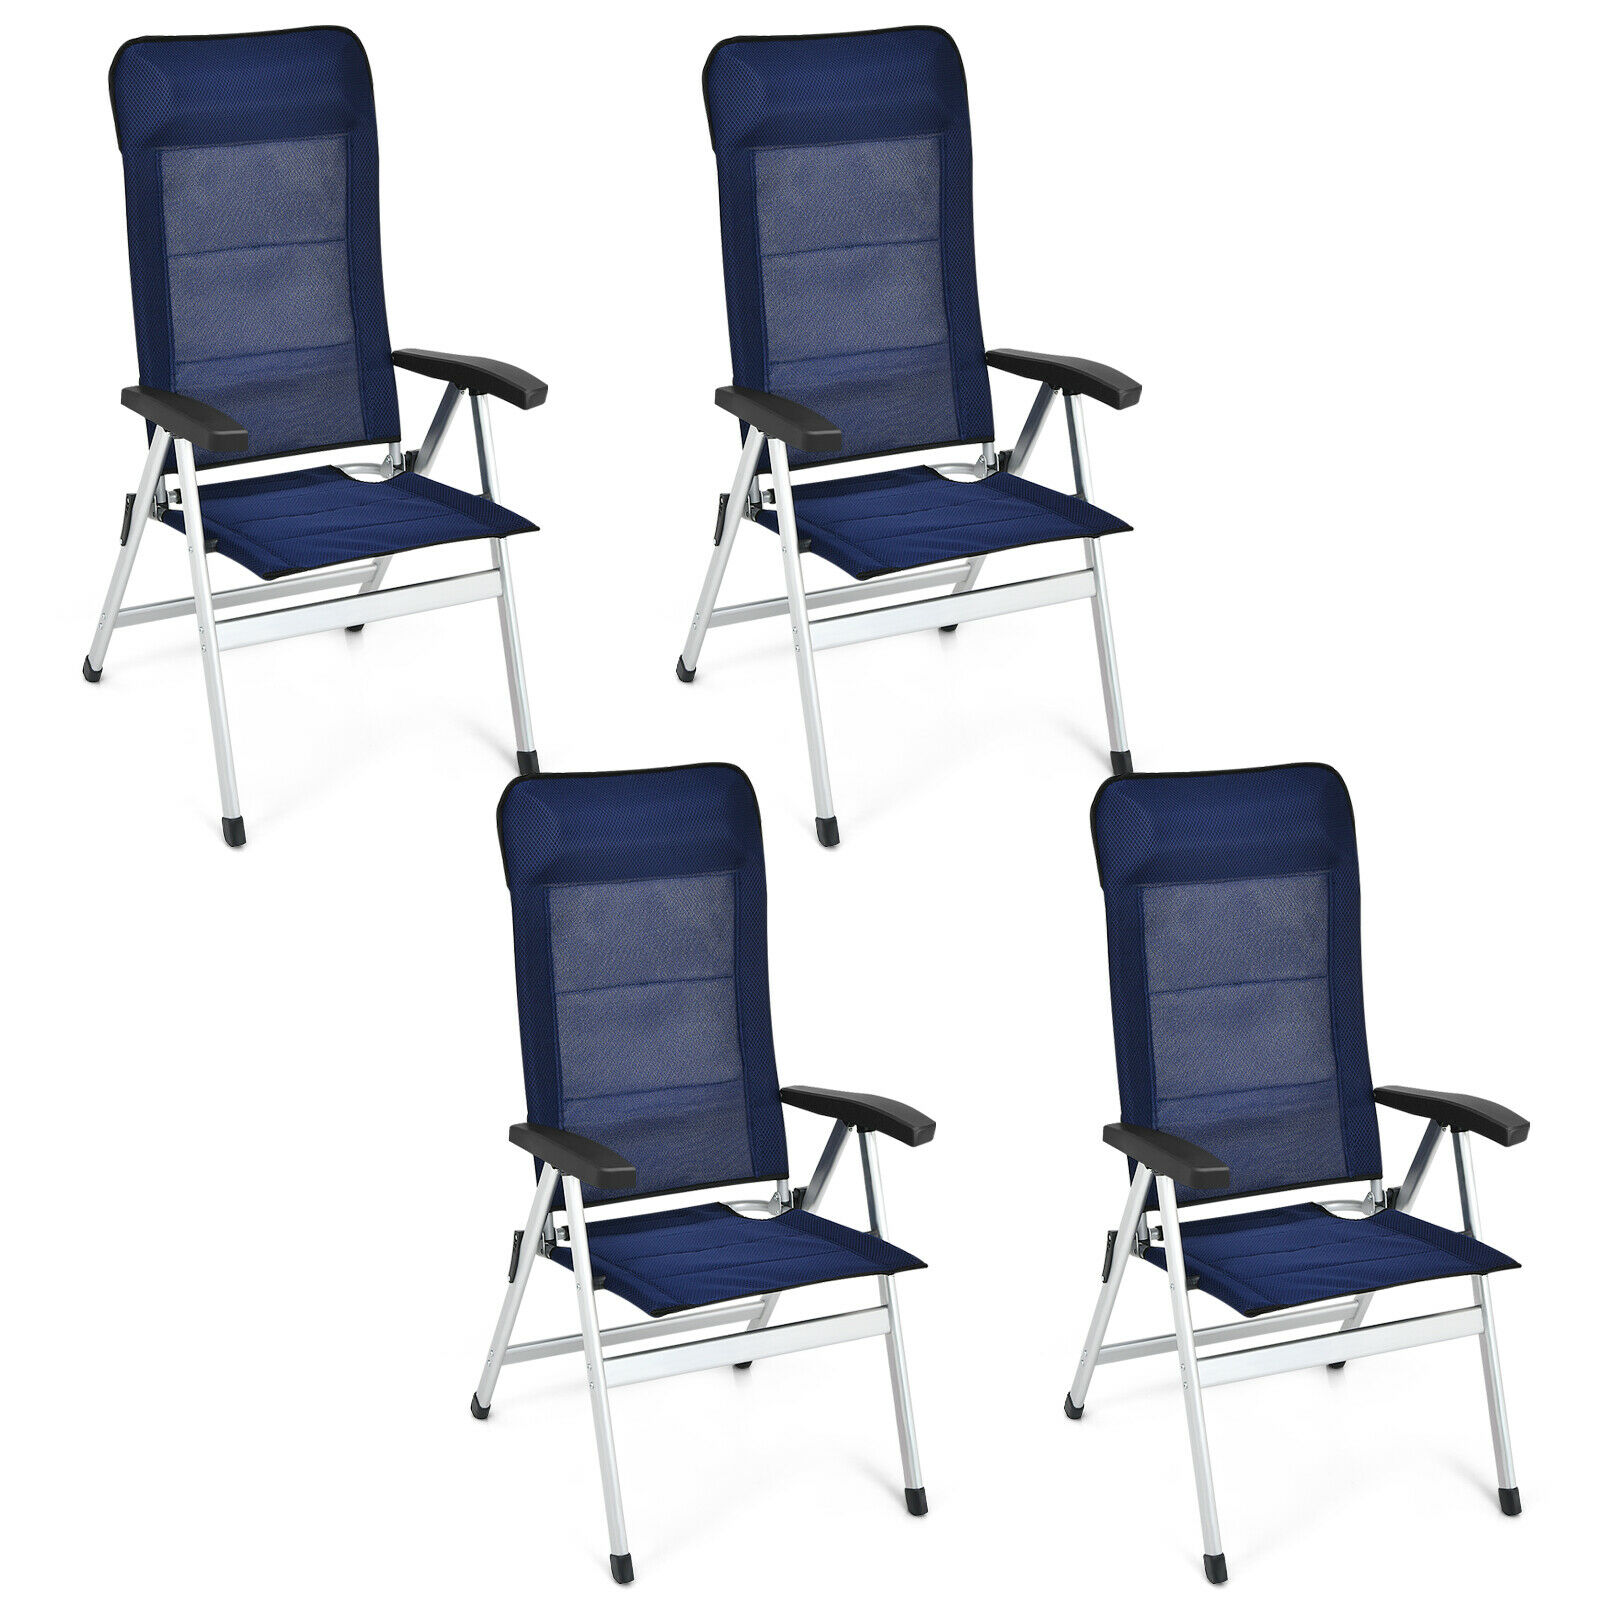 Patiojoy 4PCS Outdoor Patio Folding Dining Chairs with Reclining Backrest and Headrest Navy - image 1 of 6